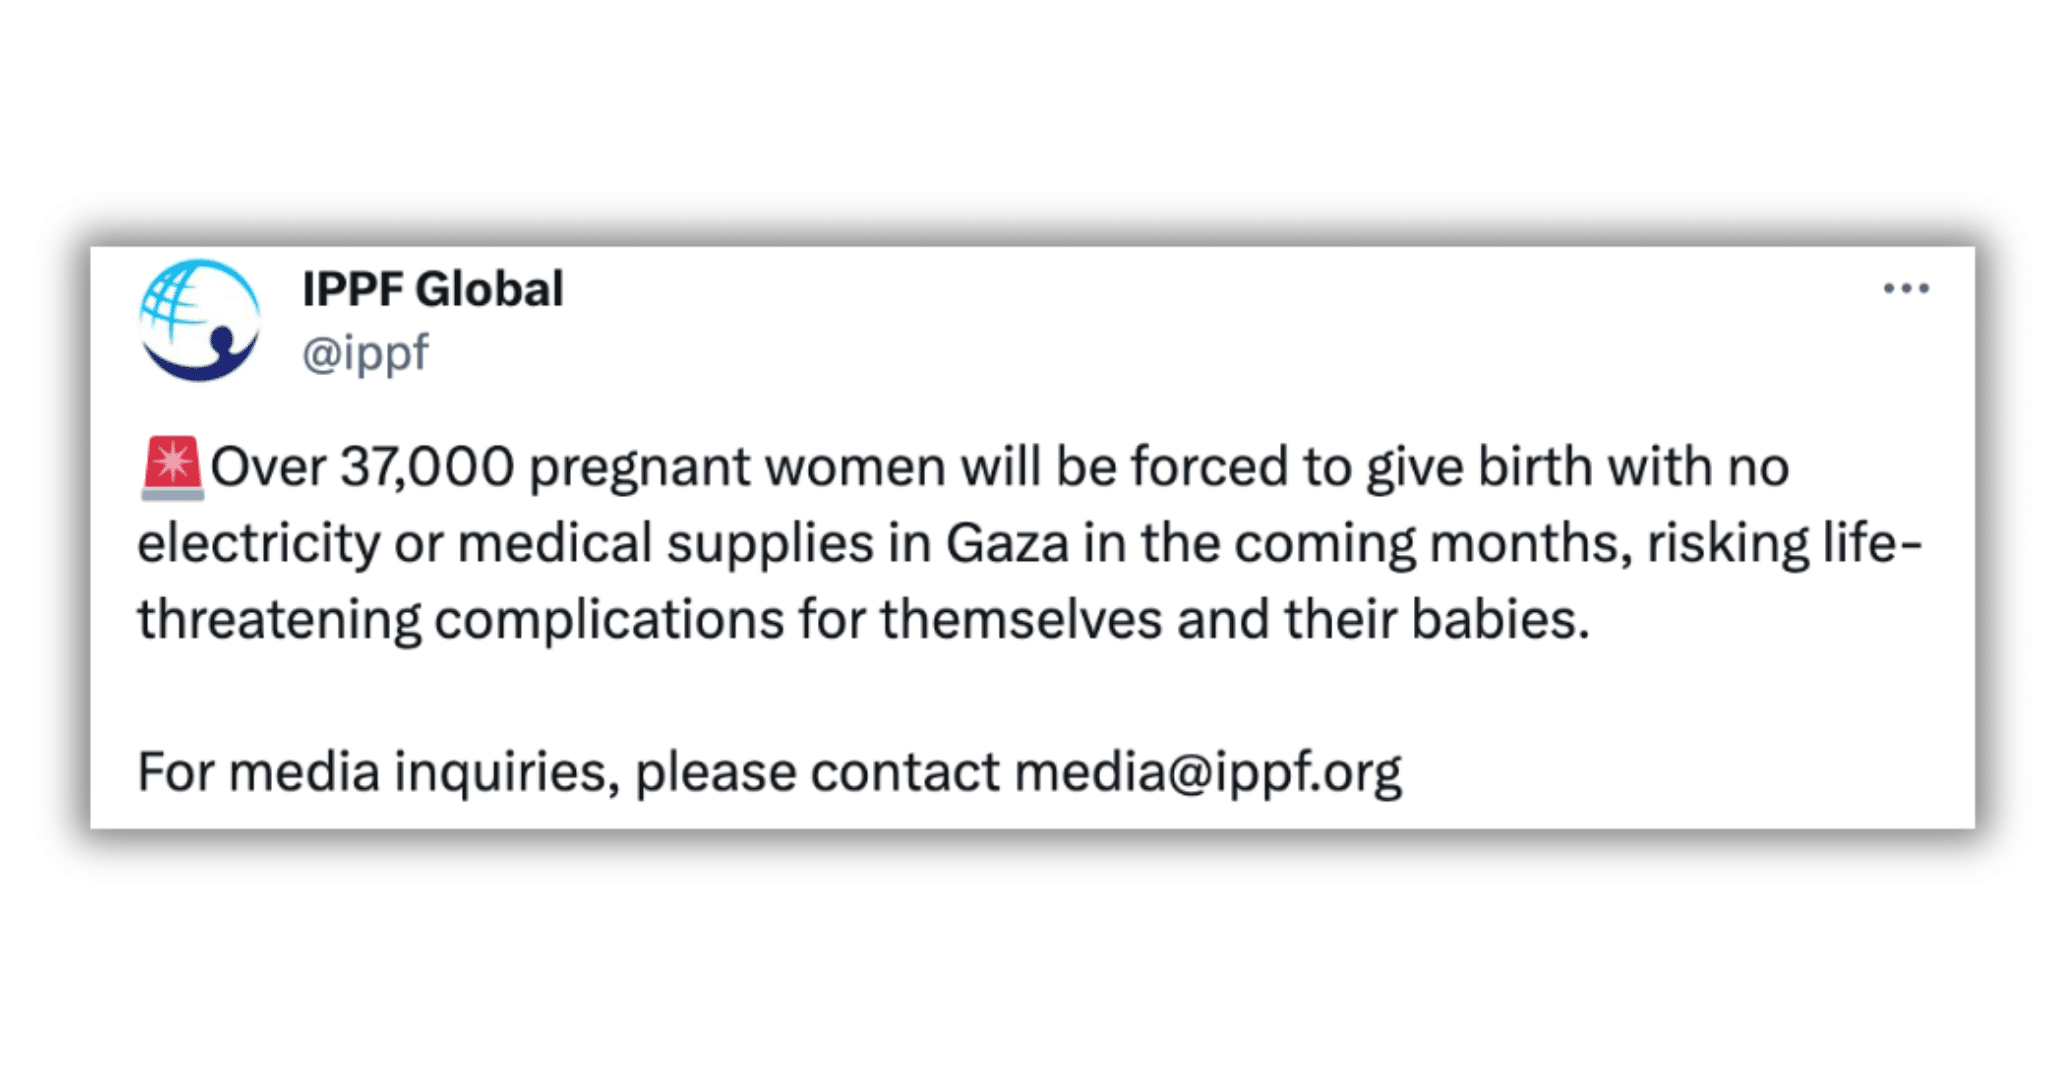 Tweet from IPPF promoting abortion in Gaza